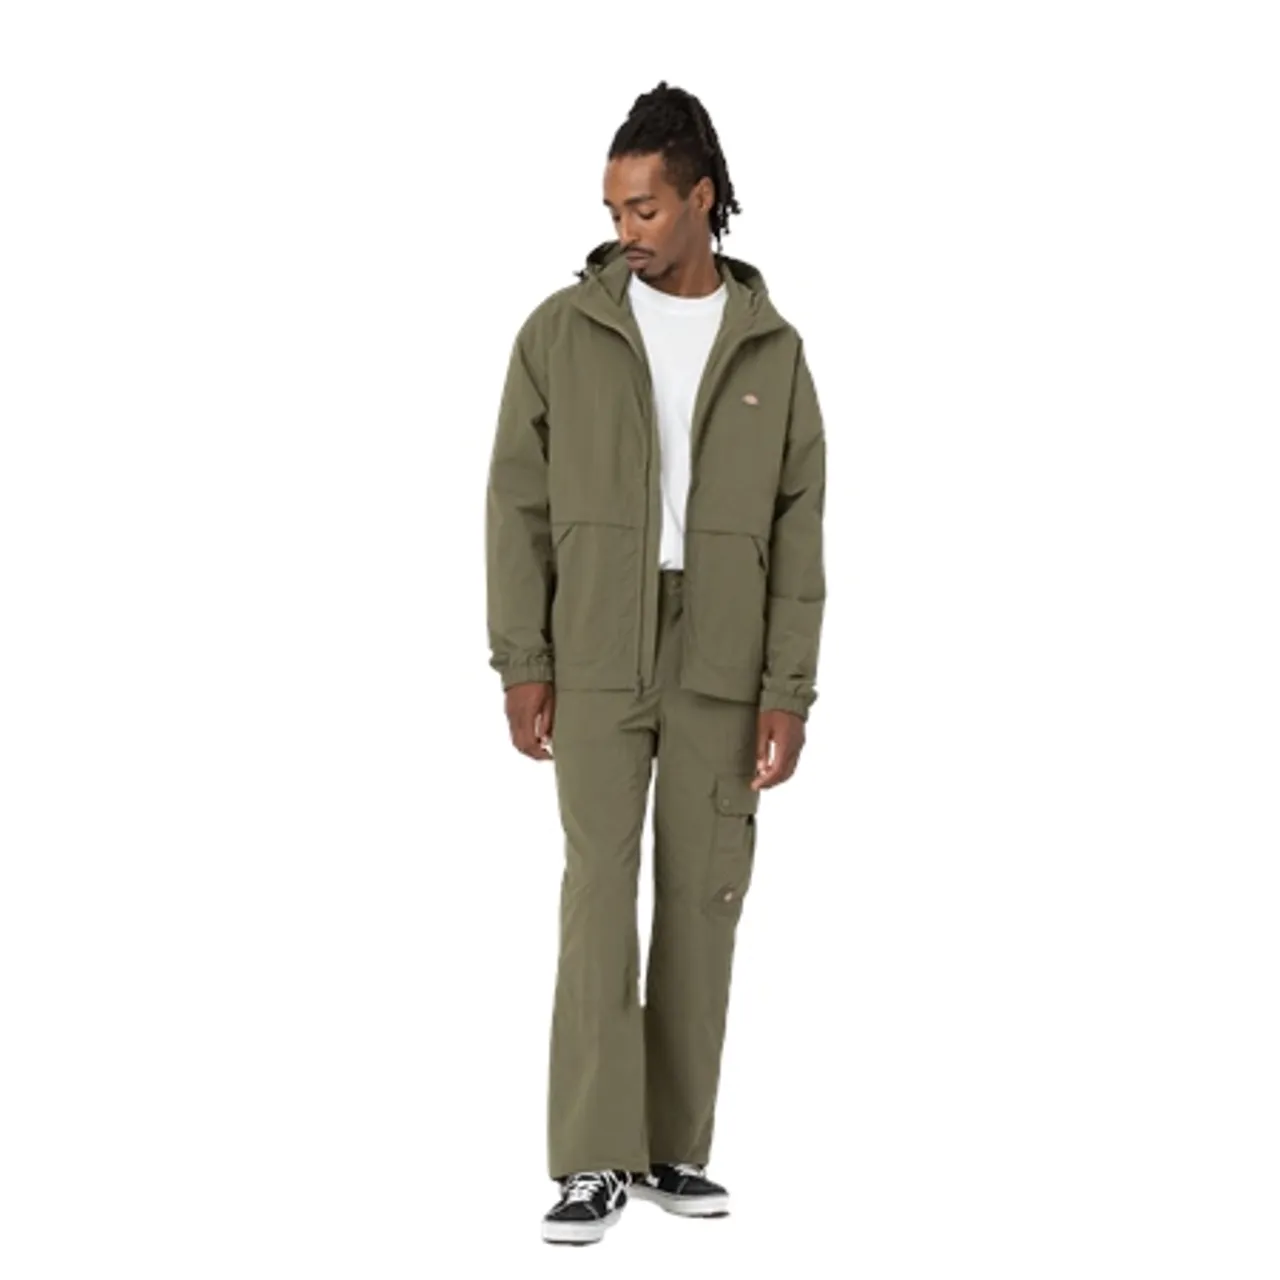 Dickies Jackson Cargo Trousers - Military Green